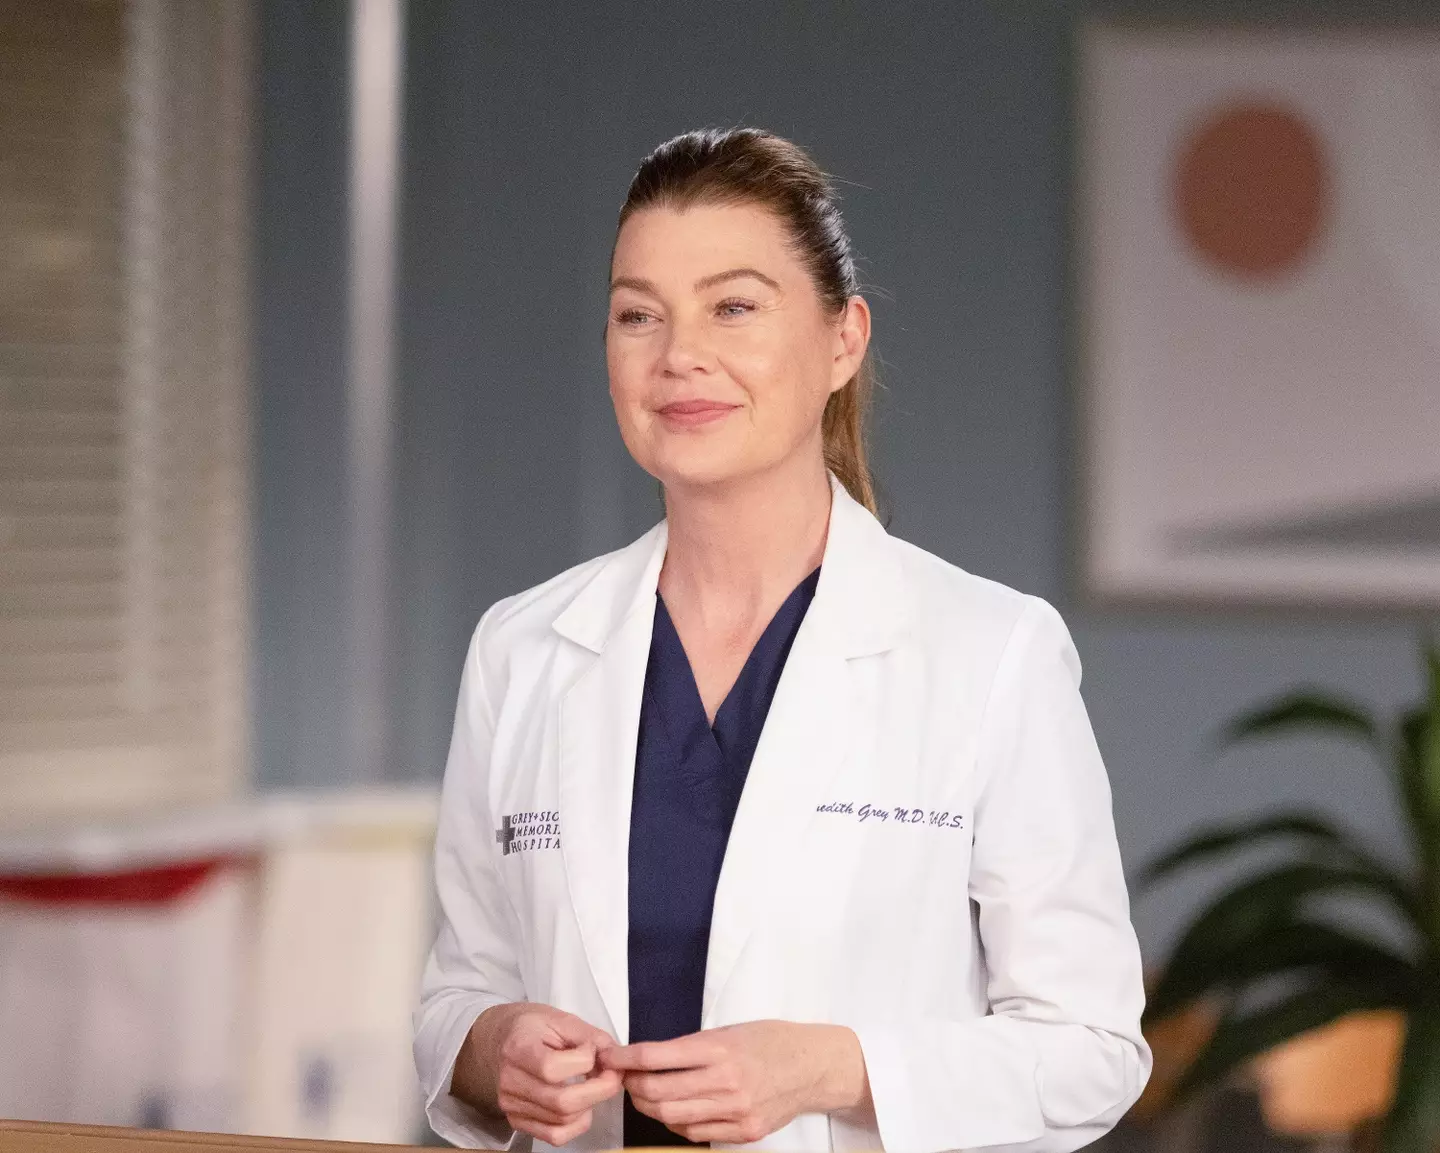 Grey's Anatomy has been picked up for a 21st season.